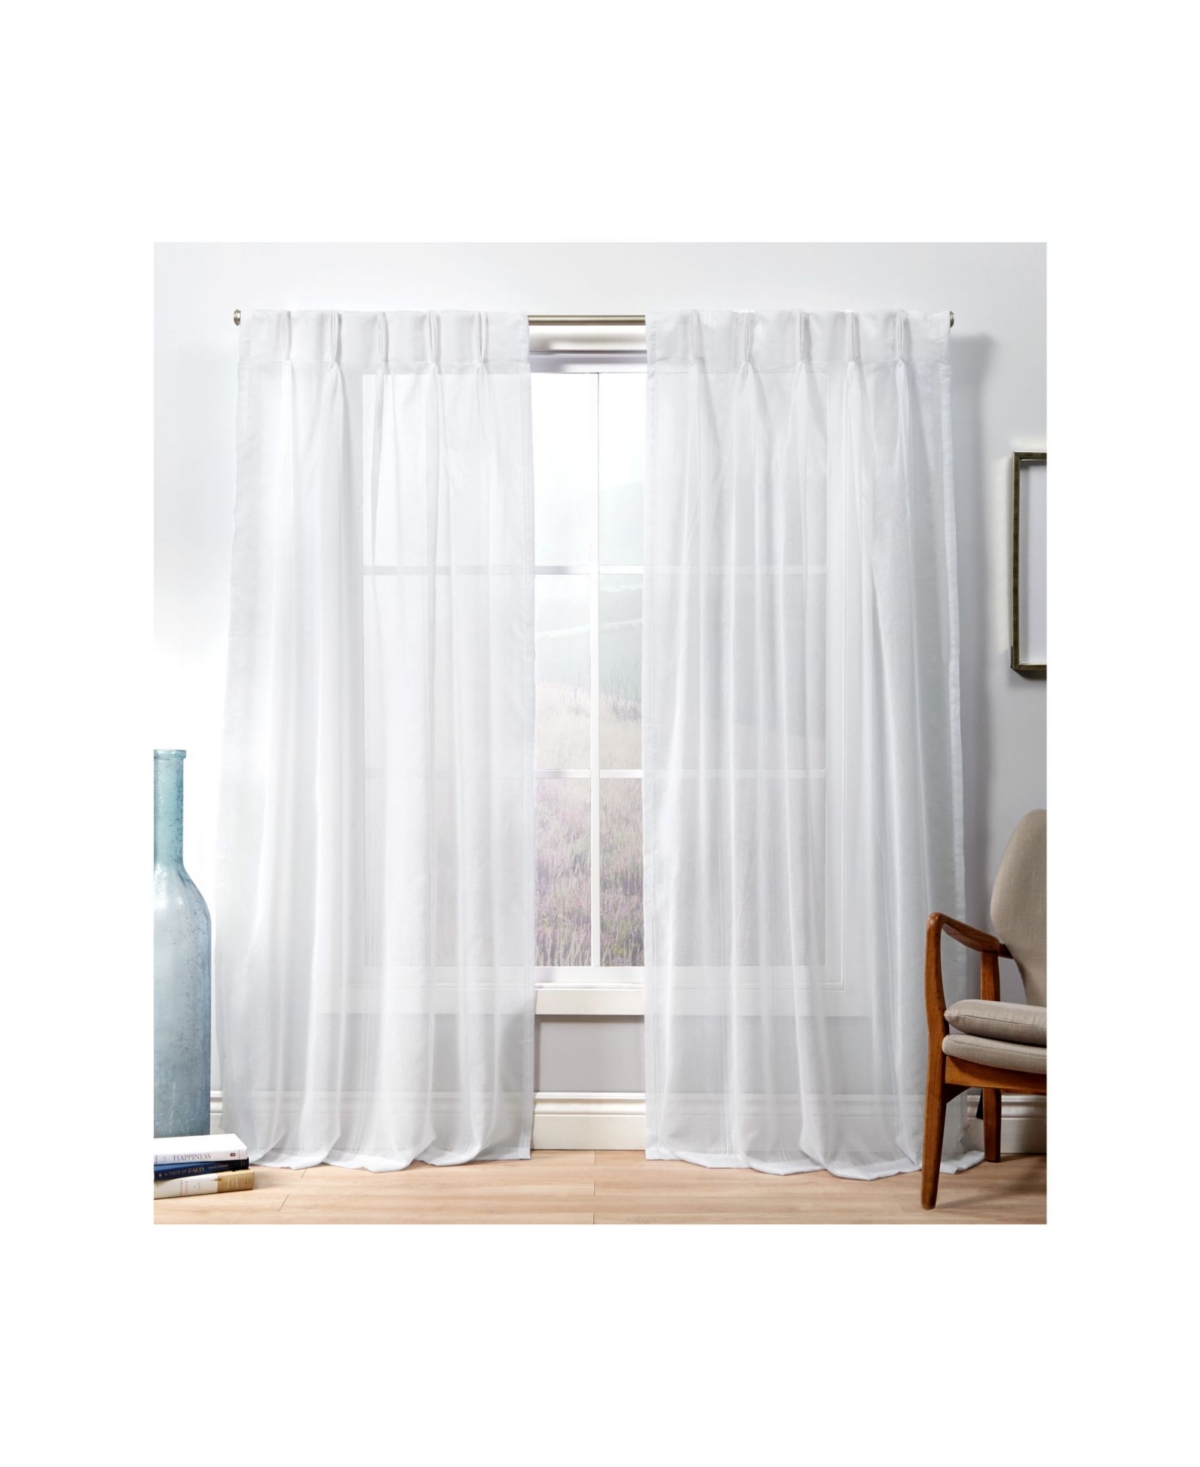 Curtains Penny Sheer Embellished Stripe Grommet Top Curtain Panel Pair, 27" x 108" - White